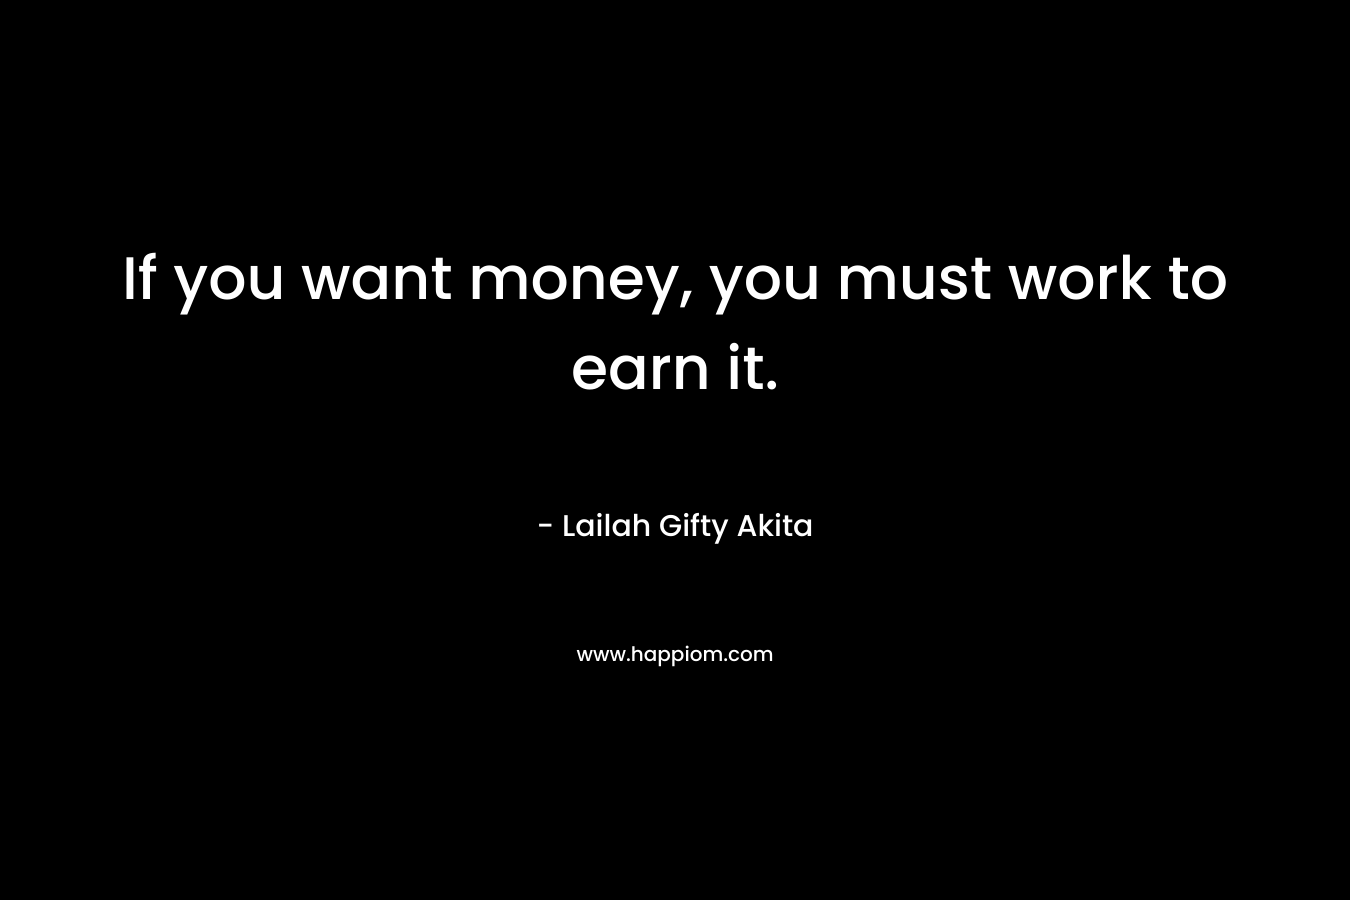 If you want money, you must work to earn it.